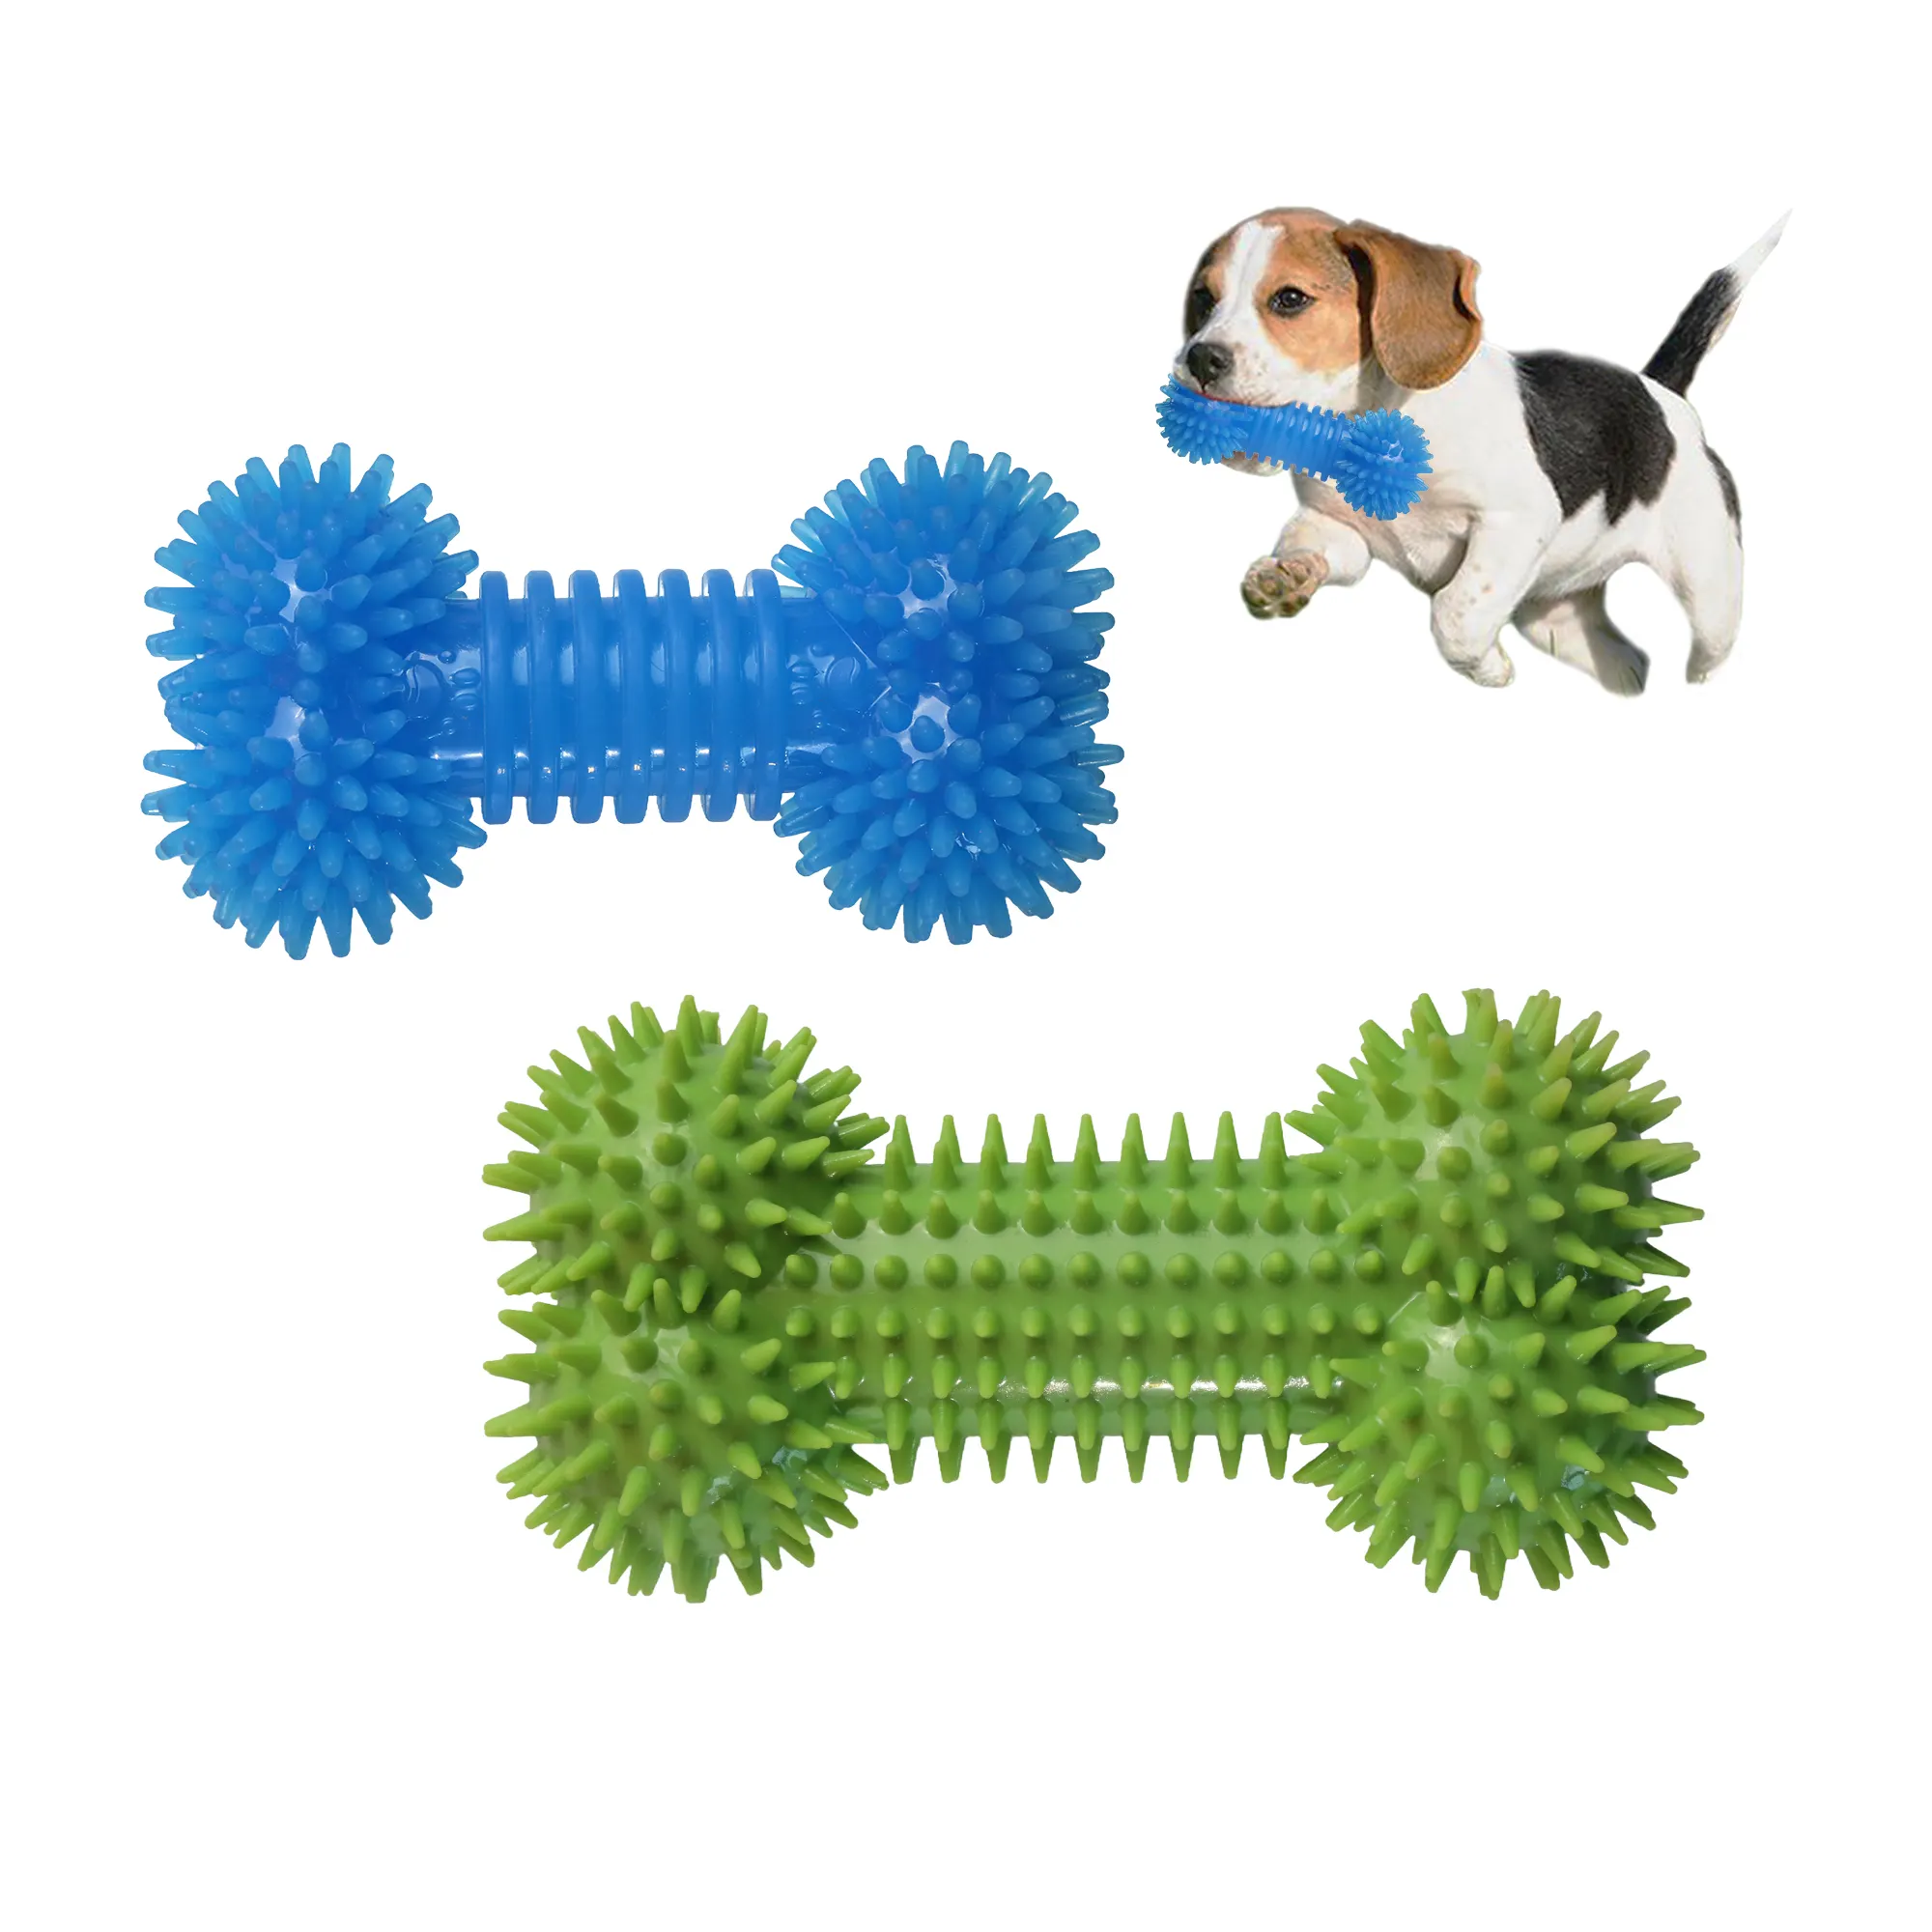 C4P High Quality Solid Rubber BONE Pet Toys Bite Resistant Non-toxic Dog Interactive BONE Toys For Cat And Dog Pet Product